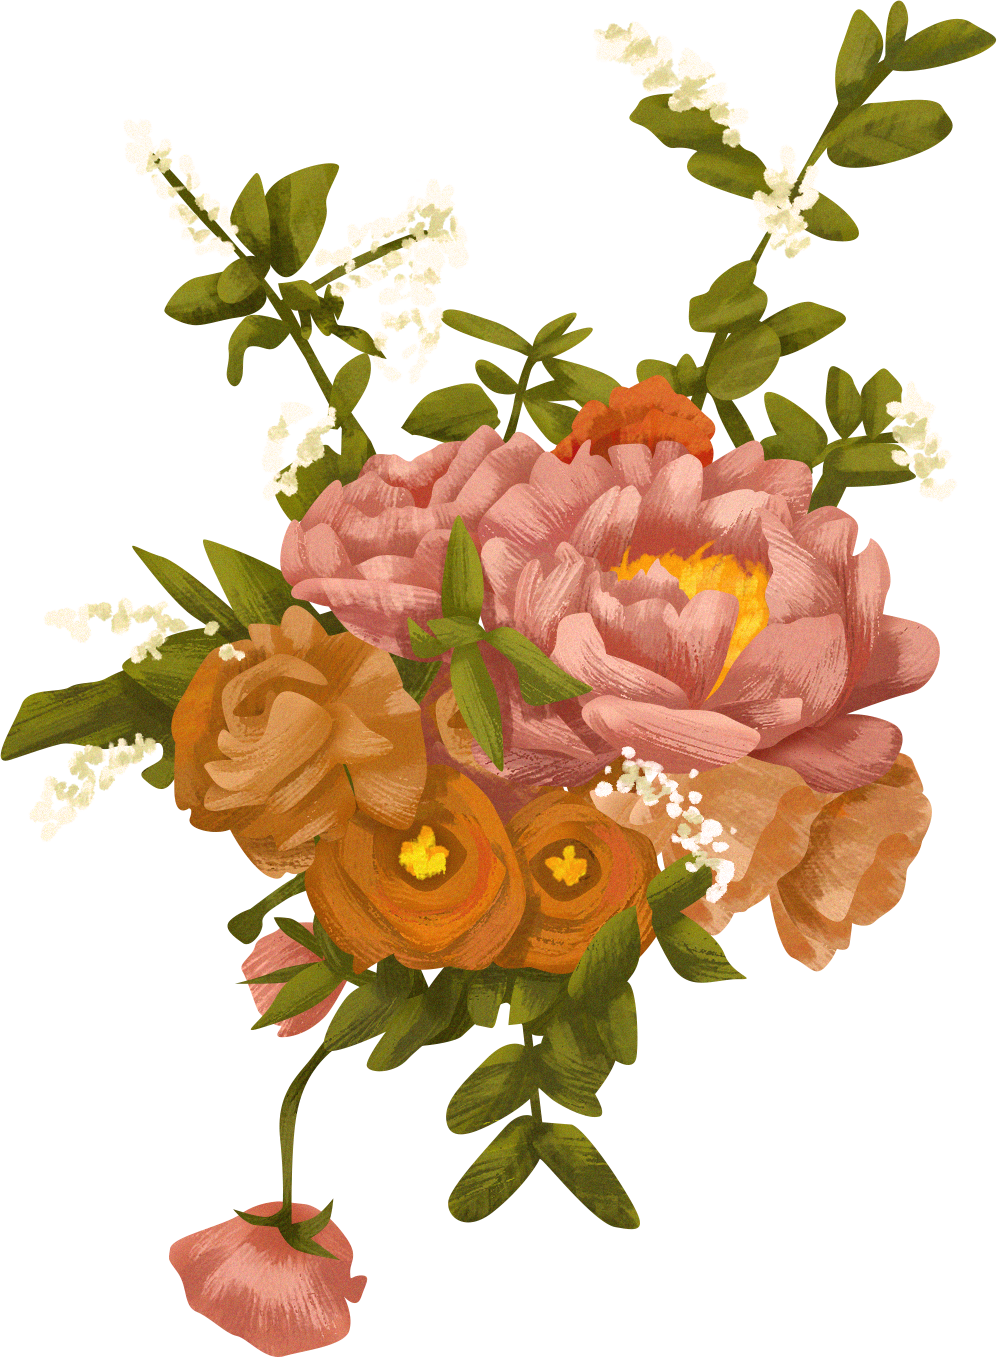 Detailed Illustrated Roses and Rue Flowers